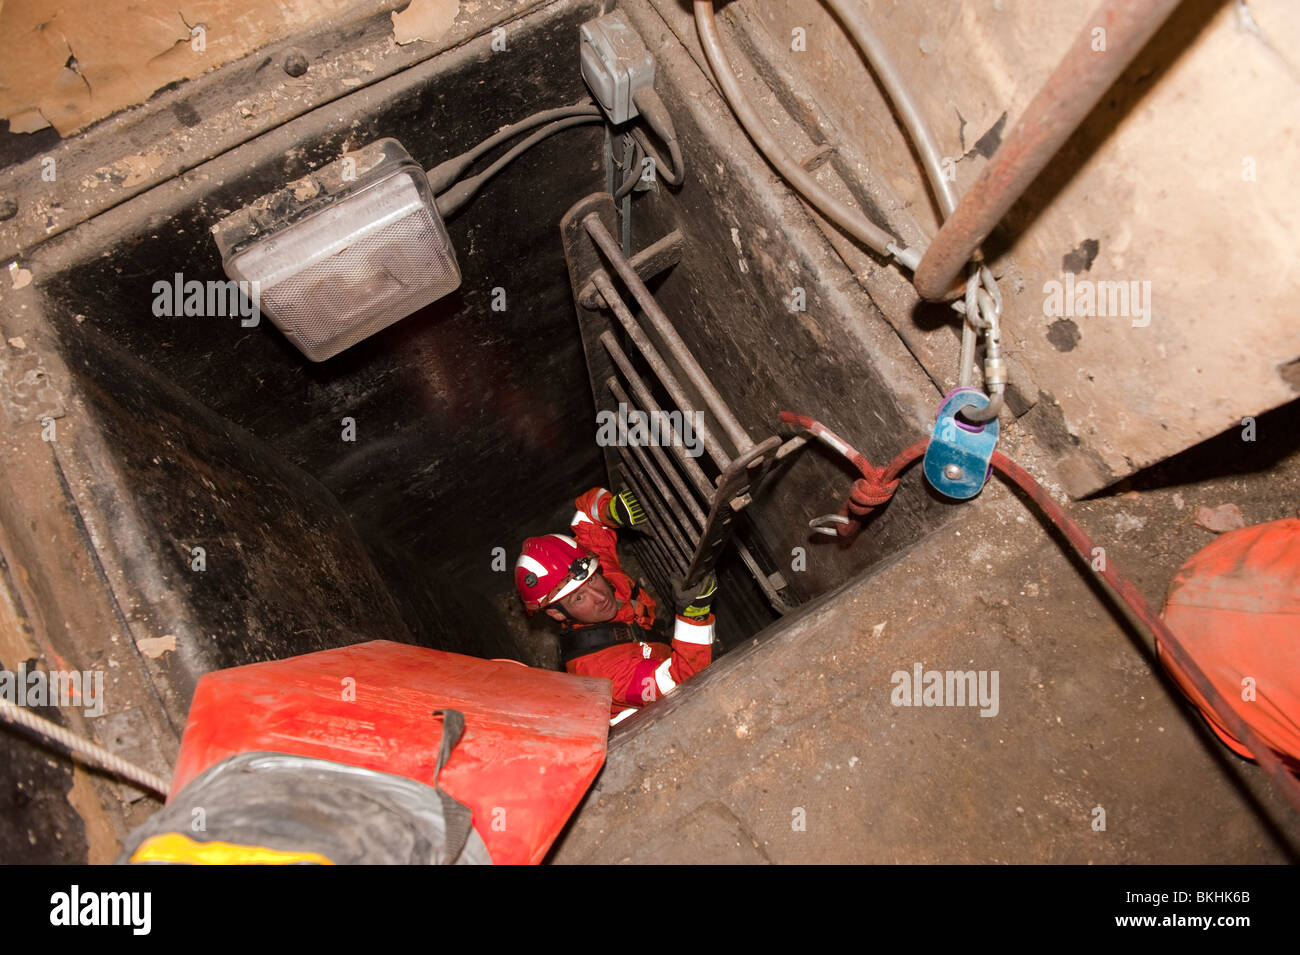 Fire & Rescue tunnel sewer rescue vertical shaft Stock Photo